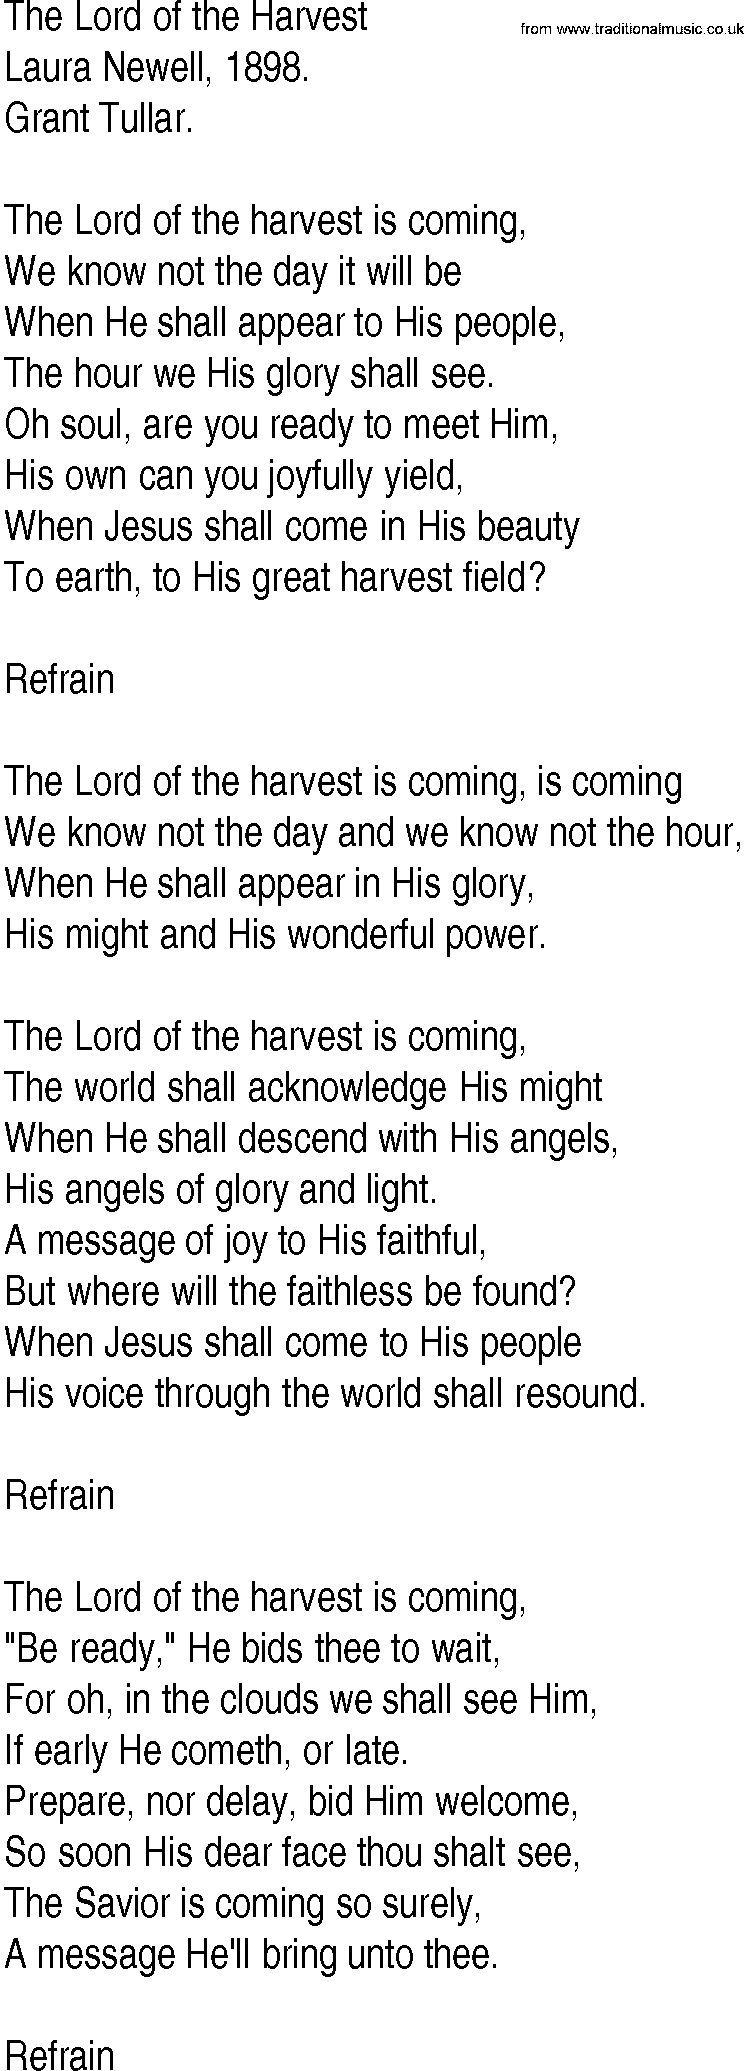 Hymn and Gospel Song: The Lord of the Harvest by Laura Newell lyrics